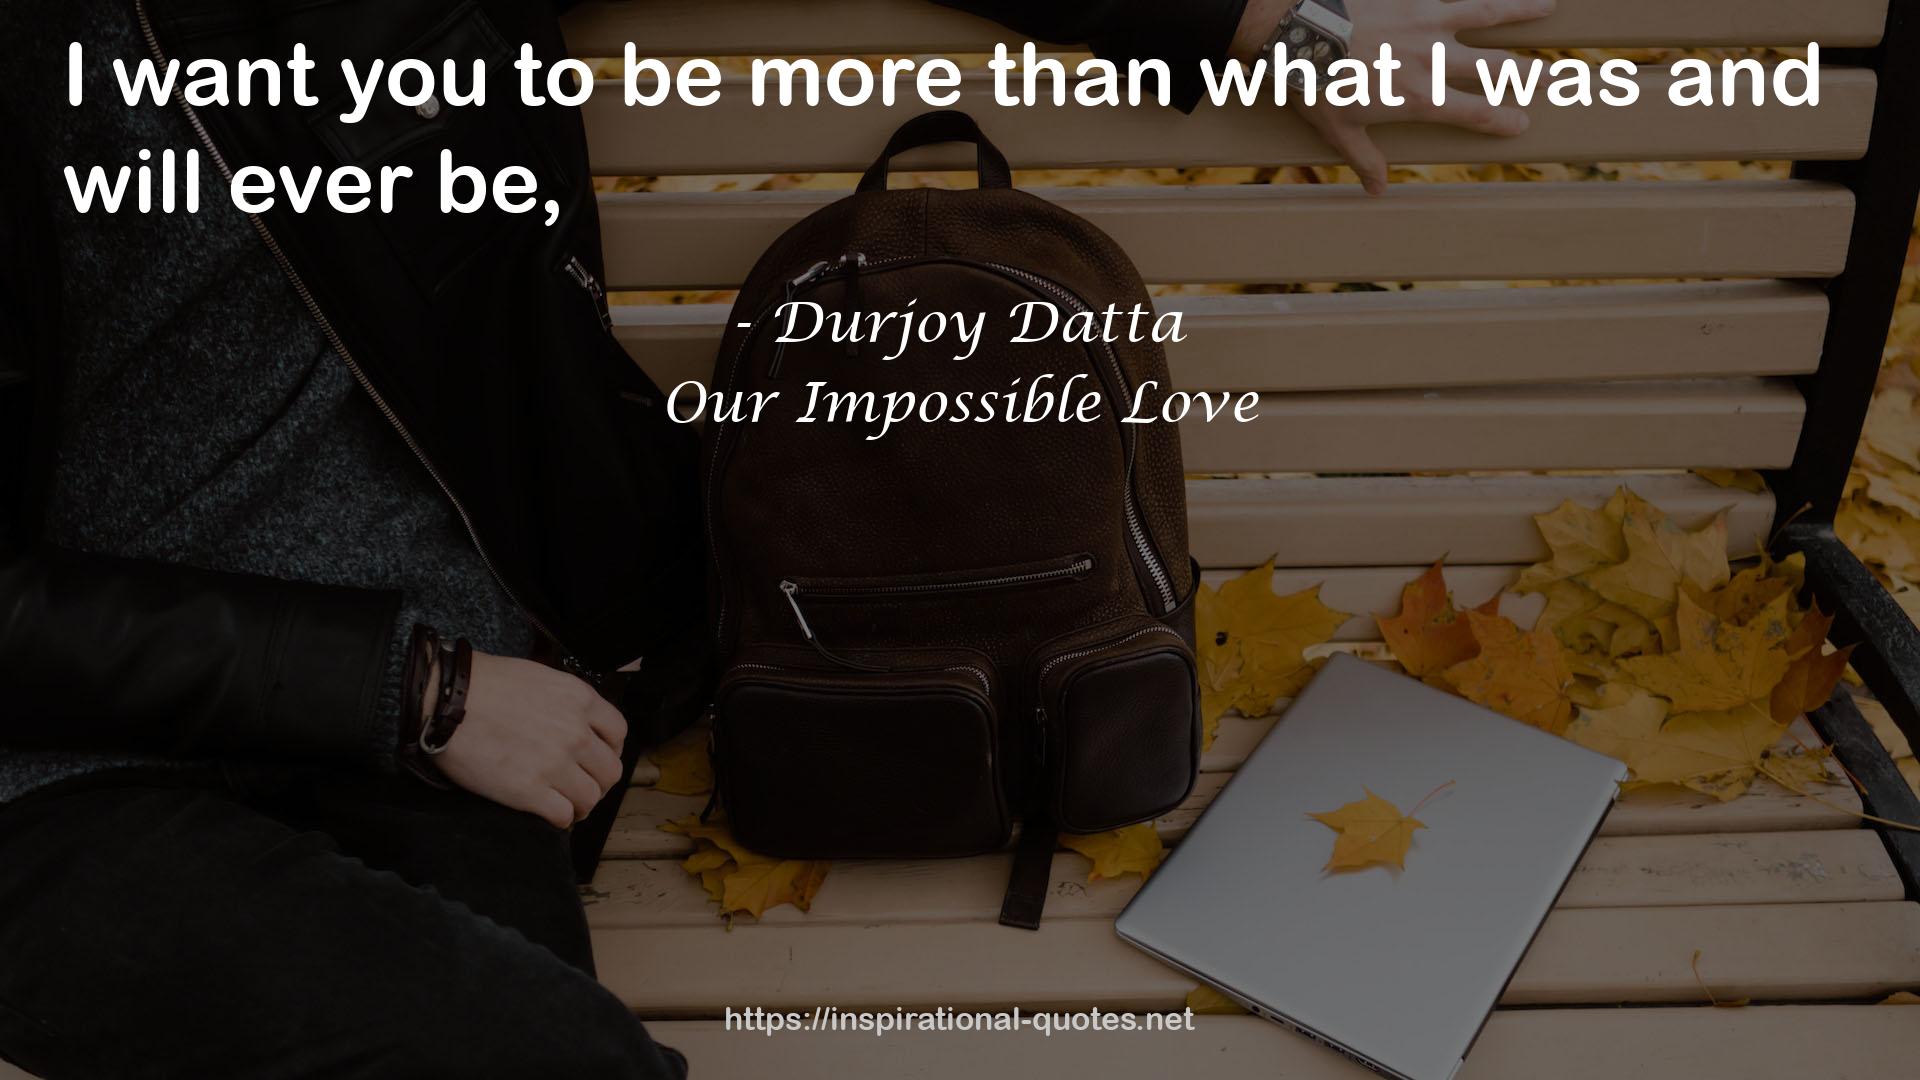 Our Impossible Love QUOTES